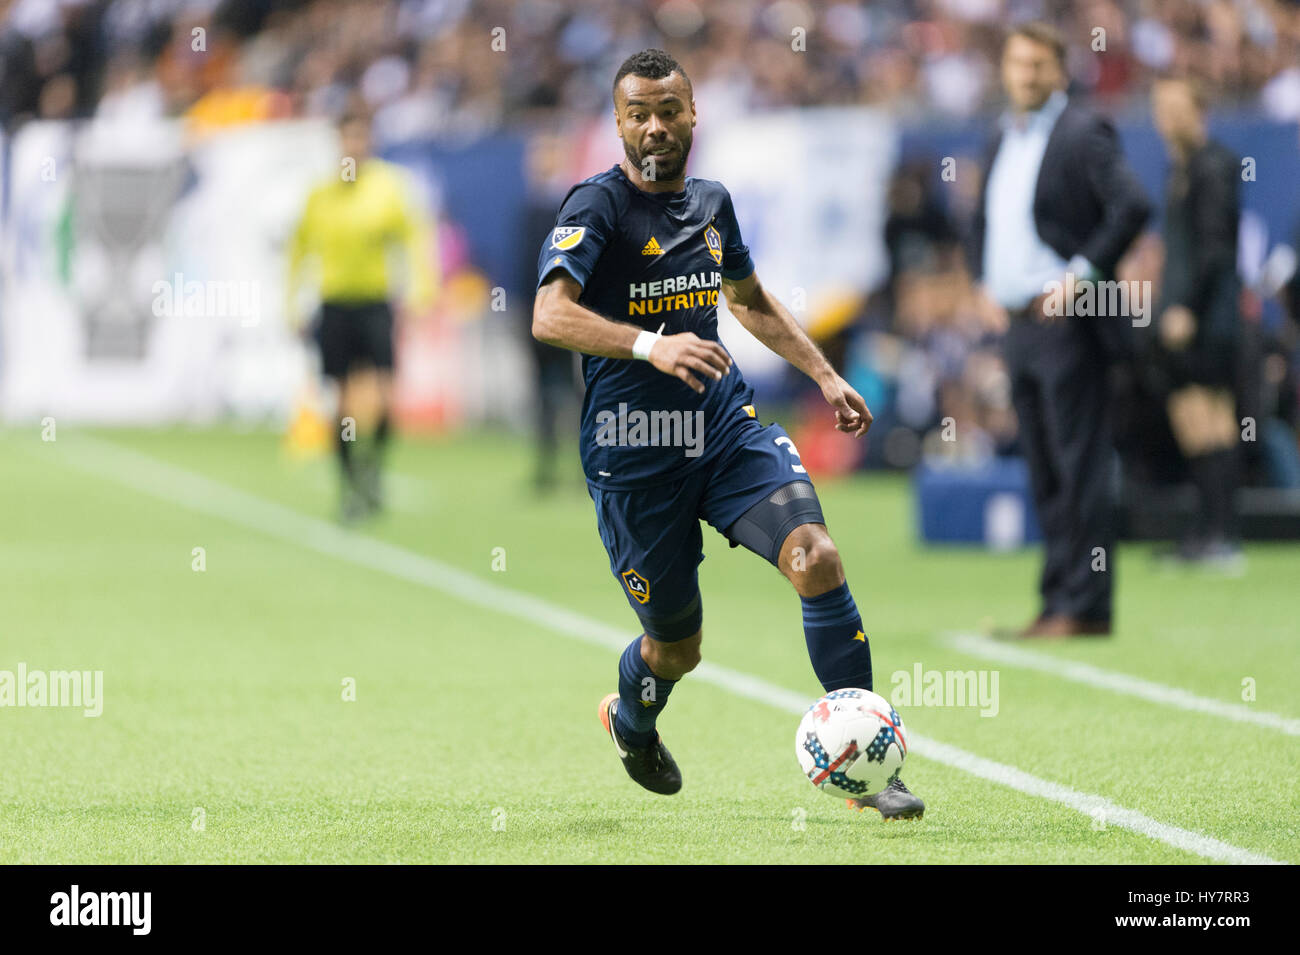 Vancouver, Canada. 1 April, 2017. Ashley Cole (3) of Los Angeles Galaxy moving with ball. Vancouver defeats Los Angeles 4-2, with Whitecap goals from Cristian Techera (13), Fredy Montero (12) and 2 goals from Matias Laba (15), Vancouver Whitecaps vs Los Angeles Galaxy, BC Place Stadium.  © Gerry Rousseau/Alamy Live News Stock Photo